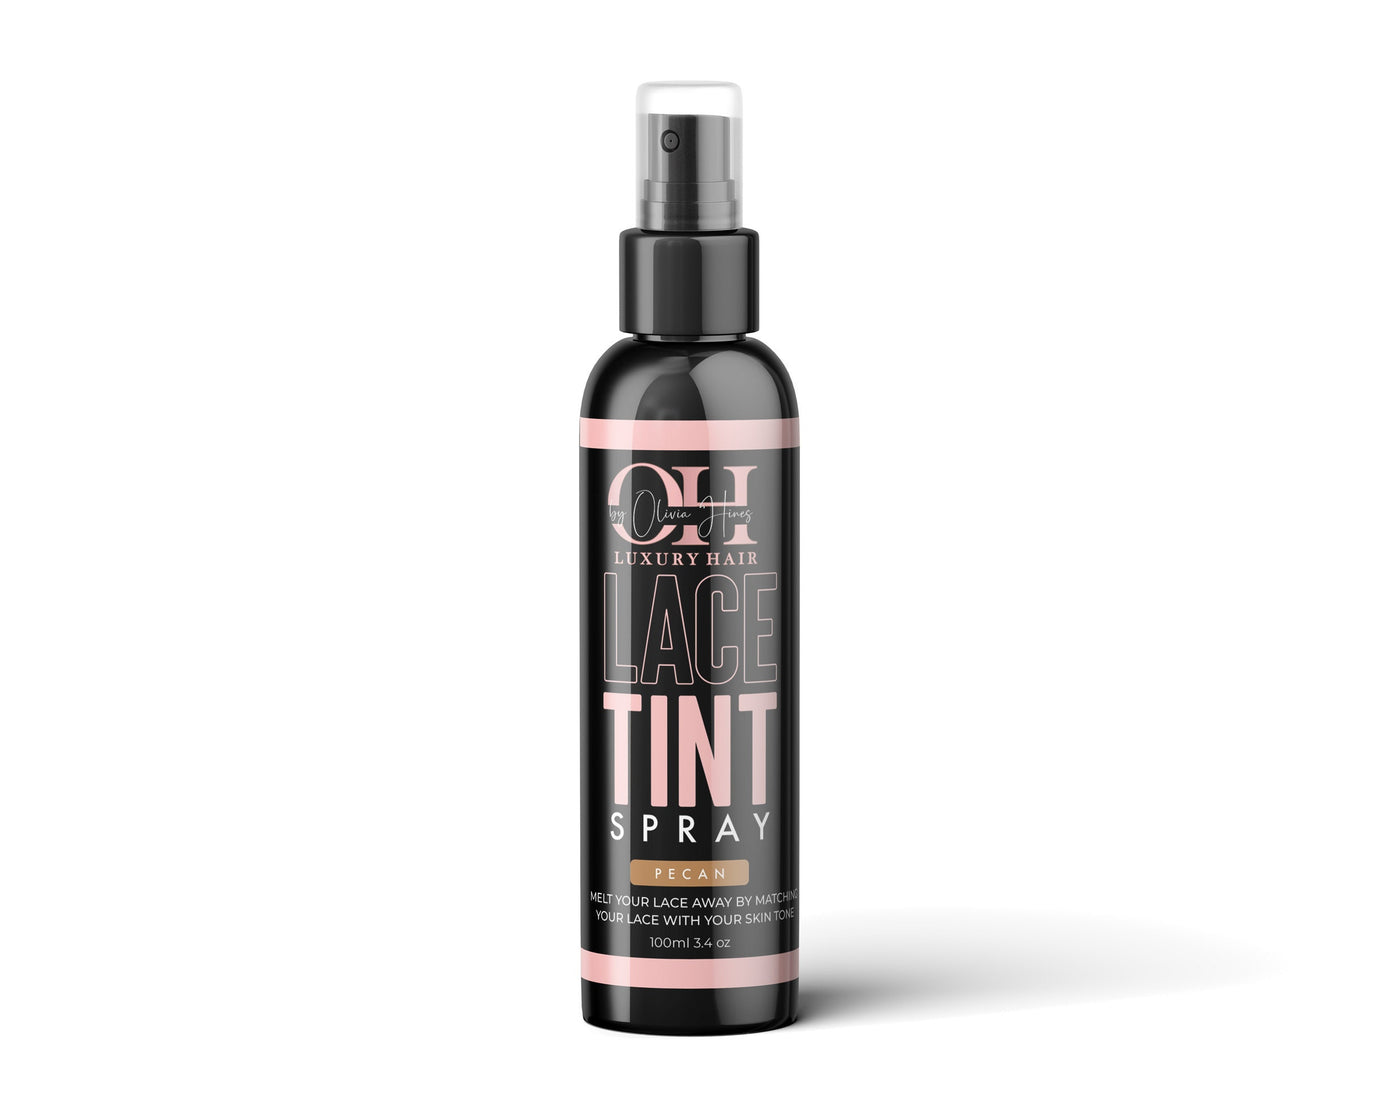 LACE TINT SPRAY - Match your lace with your skin tone